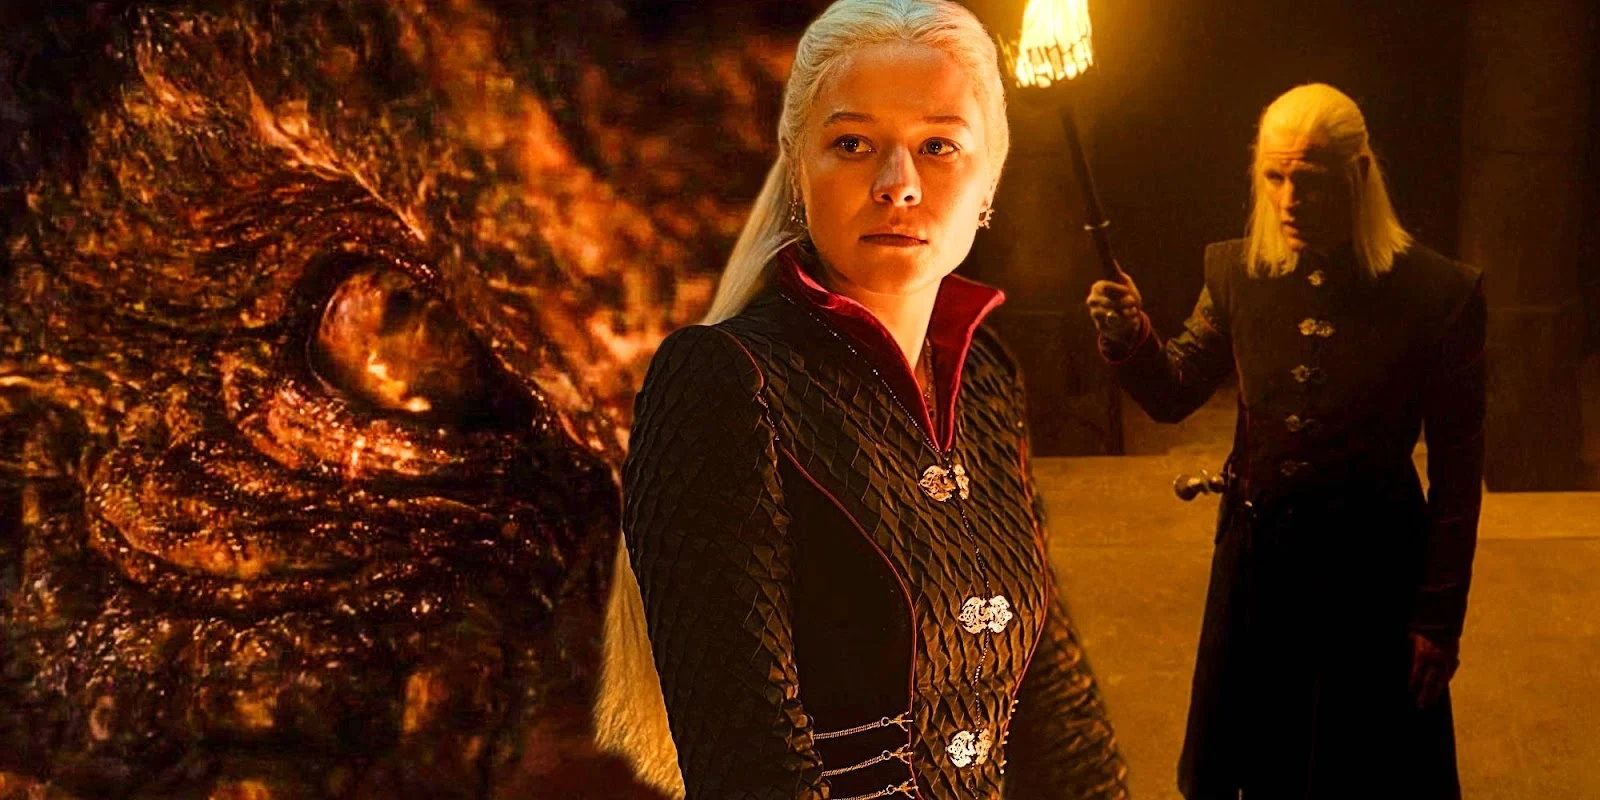 A dramatic scene featuring characters from House Targaryen embroiled in political schemes and betrayal